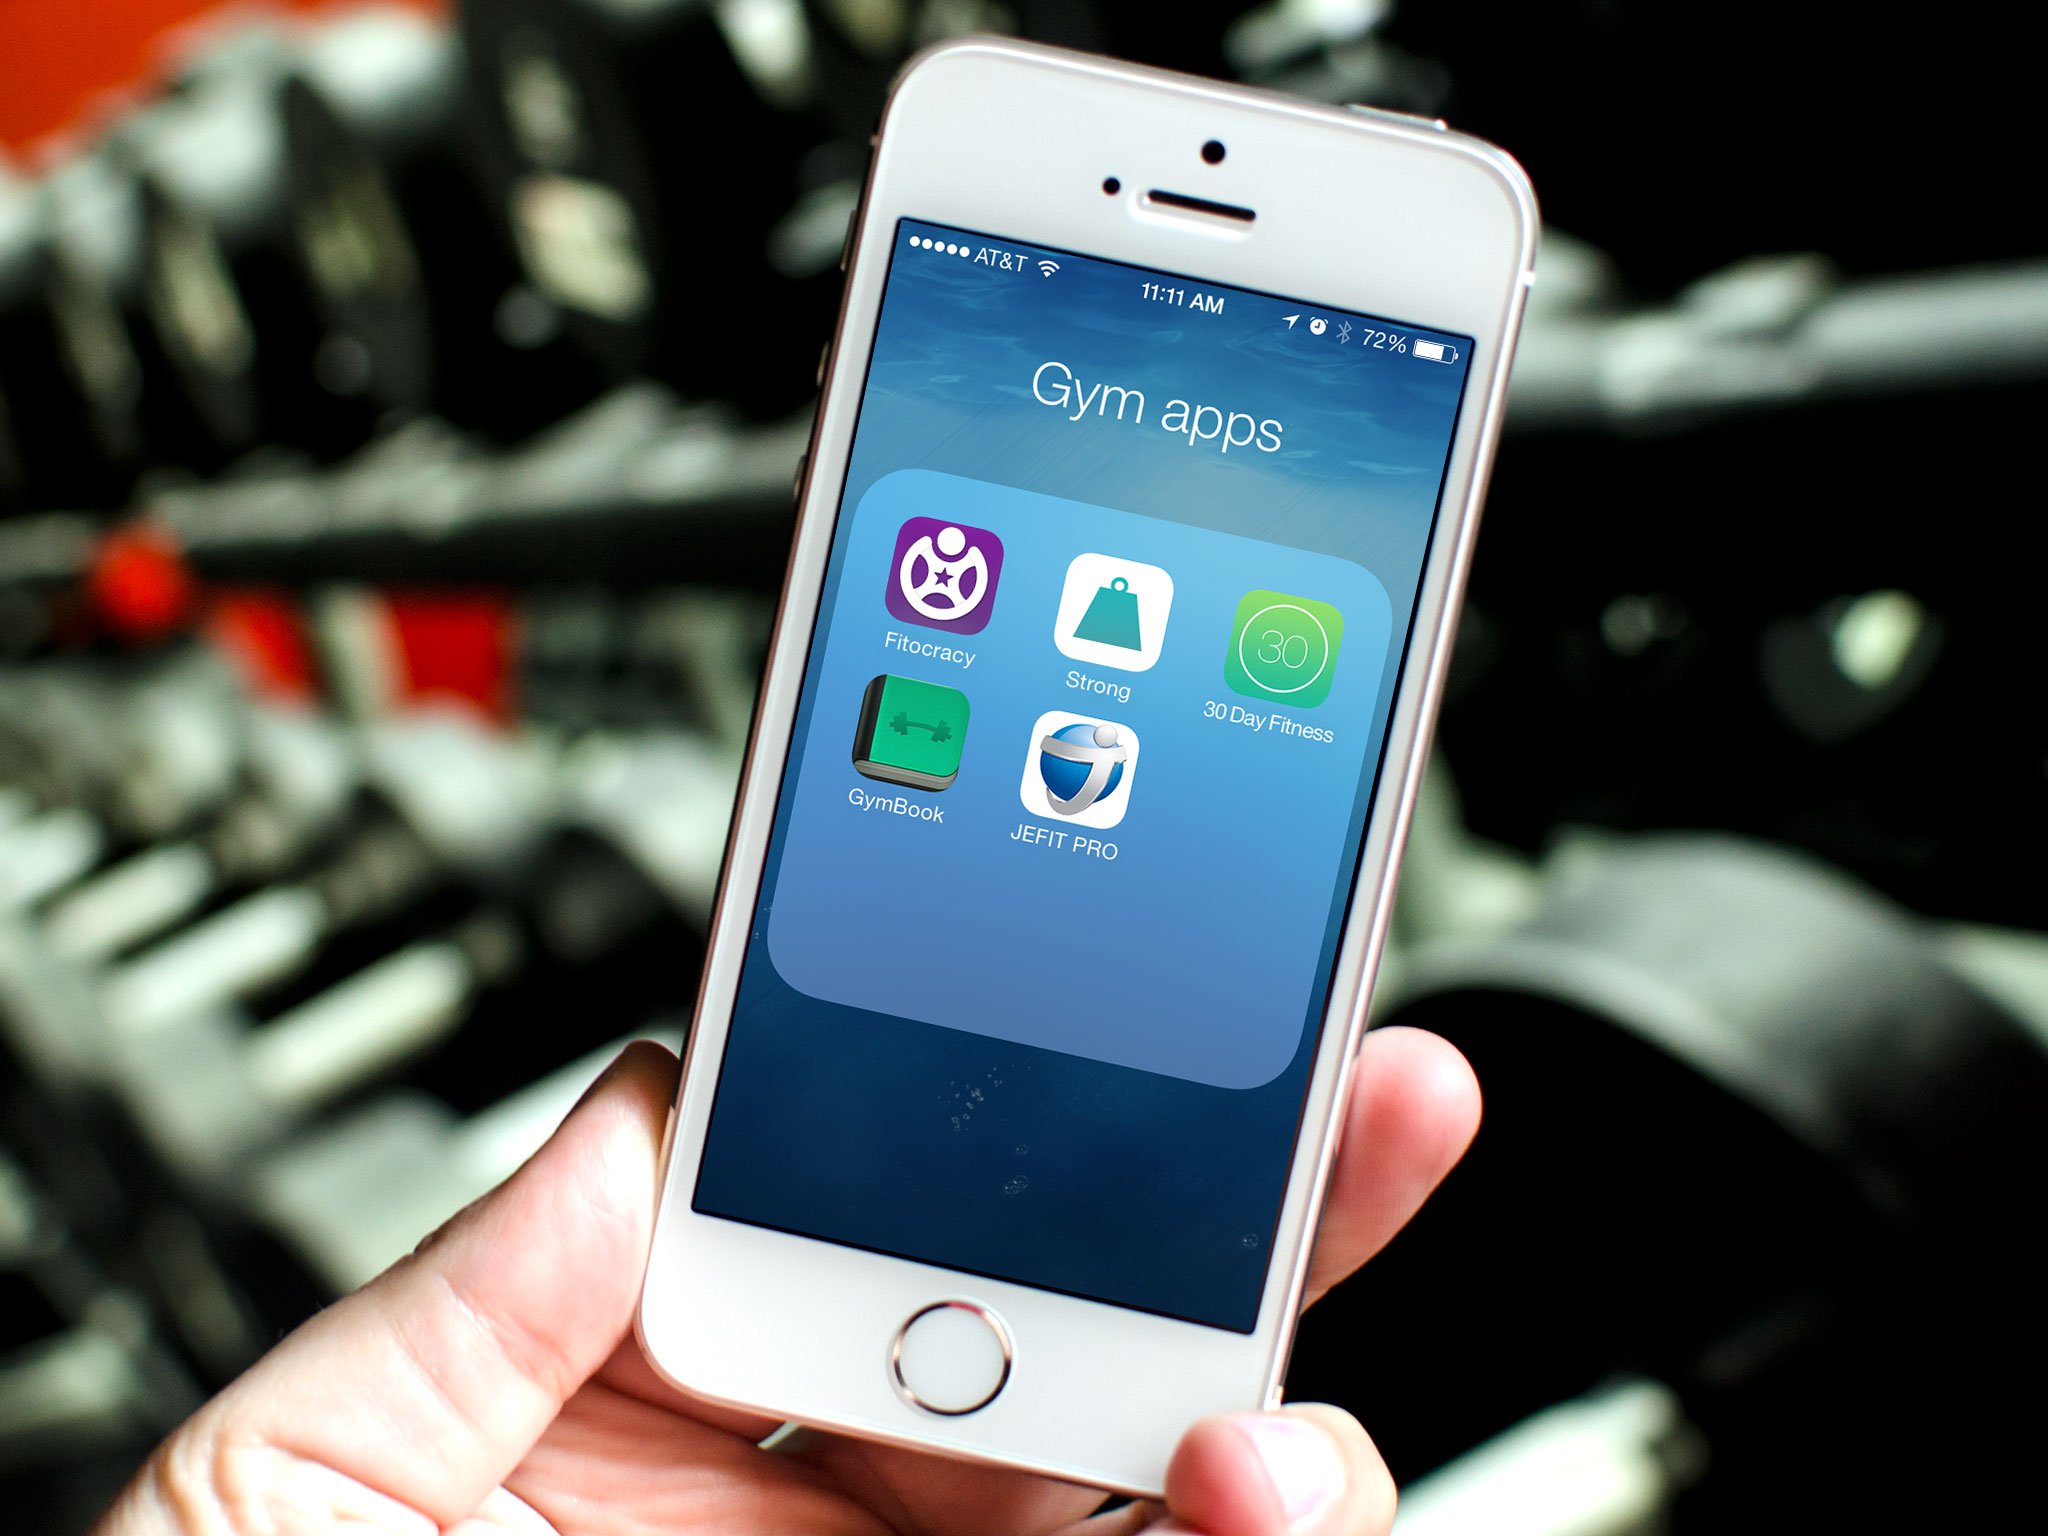 Best weight lifting and gym apps for iPhone: Fitocracy, Strong, GymBook, and more!